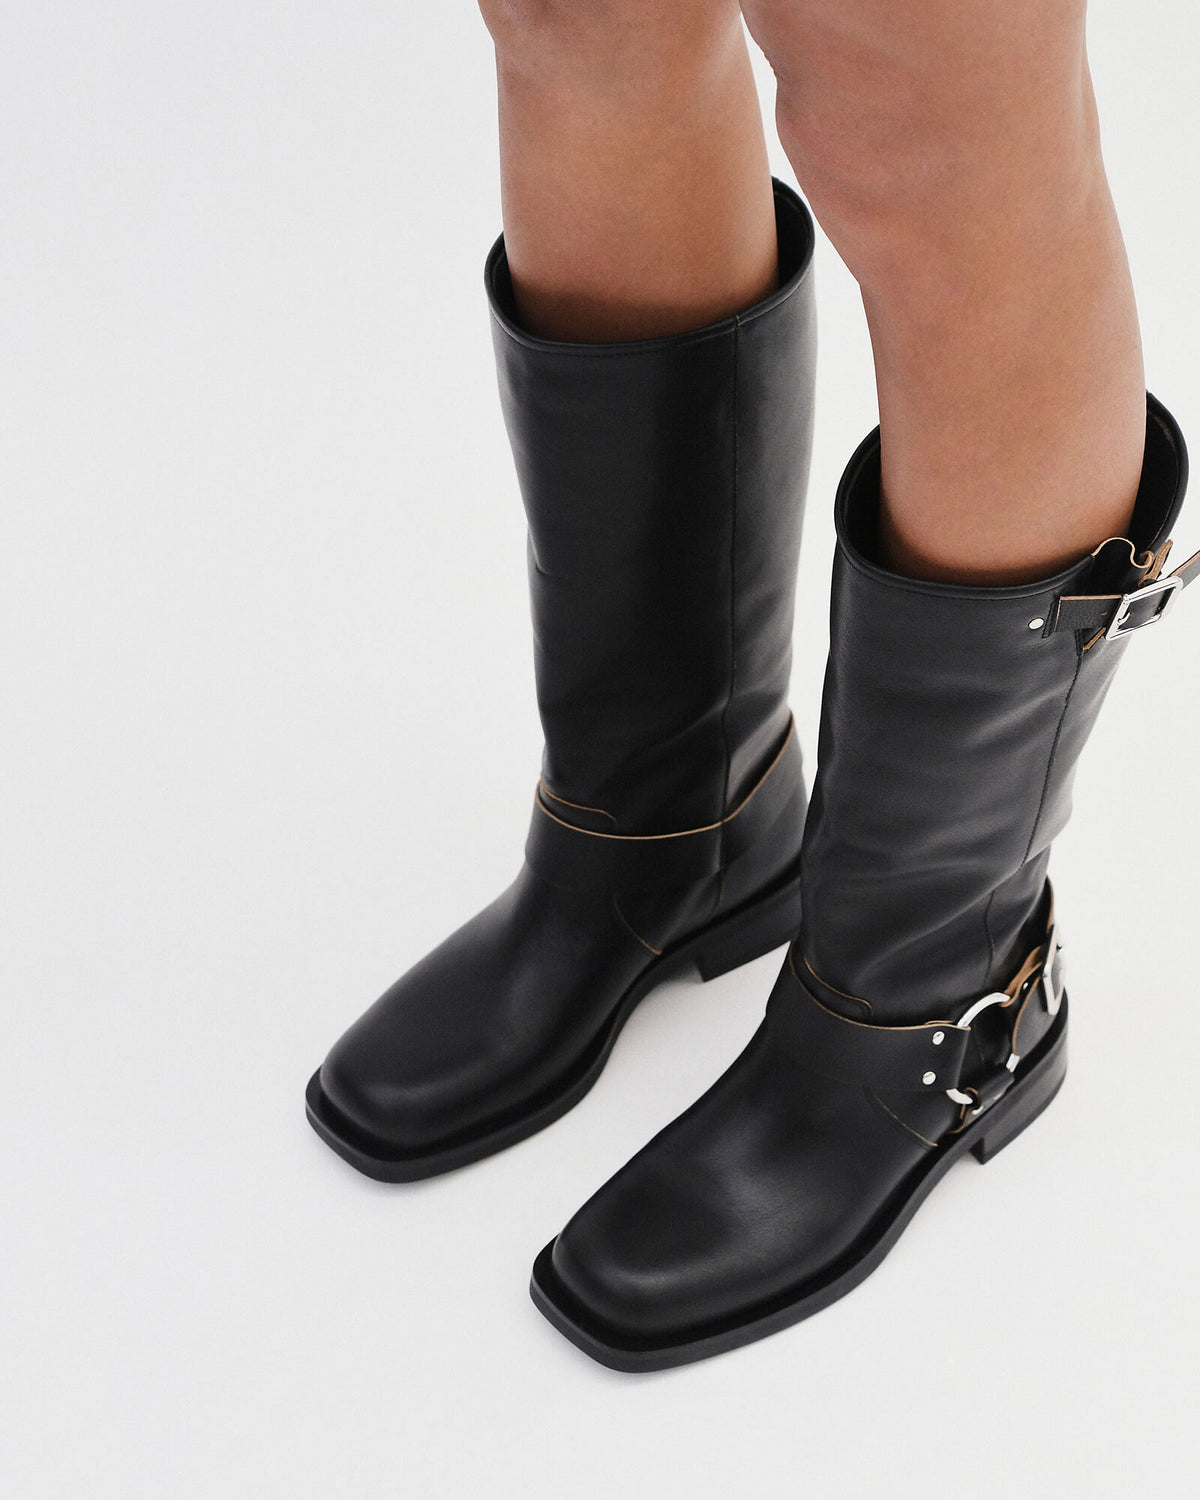 ROCCO CALF BOOTS BLACK LEATHER